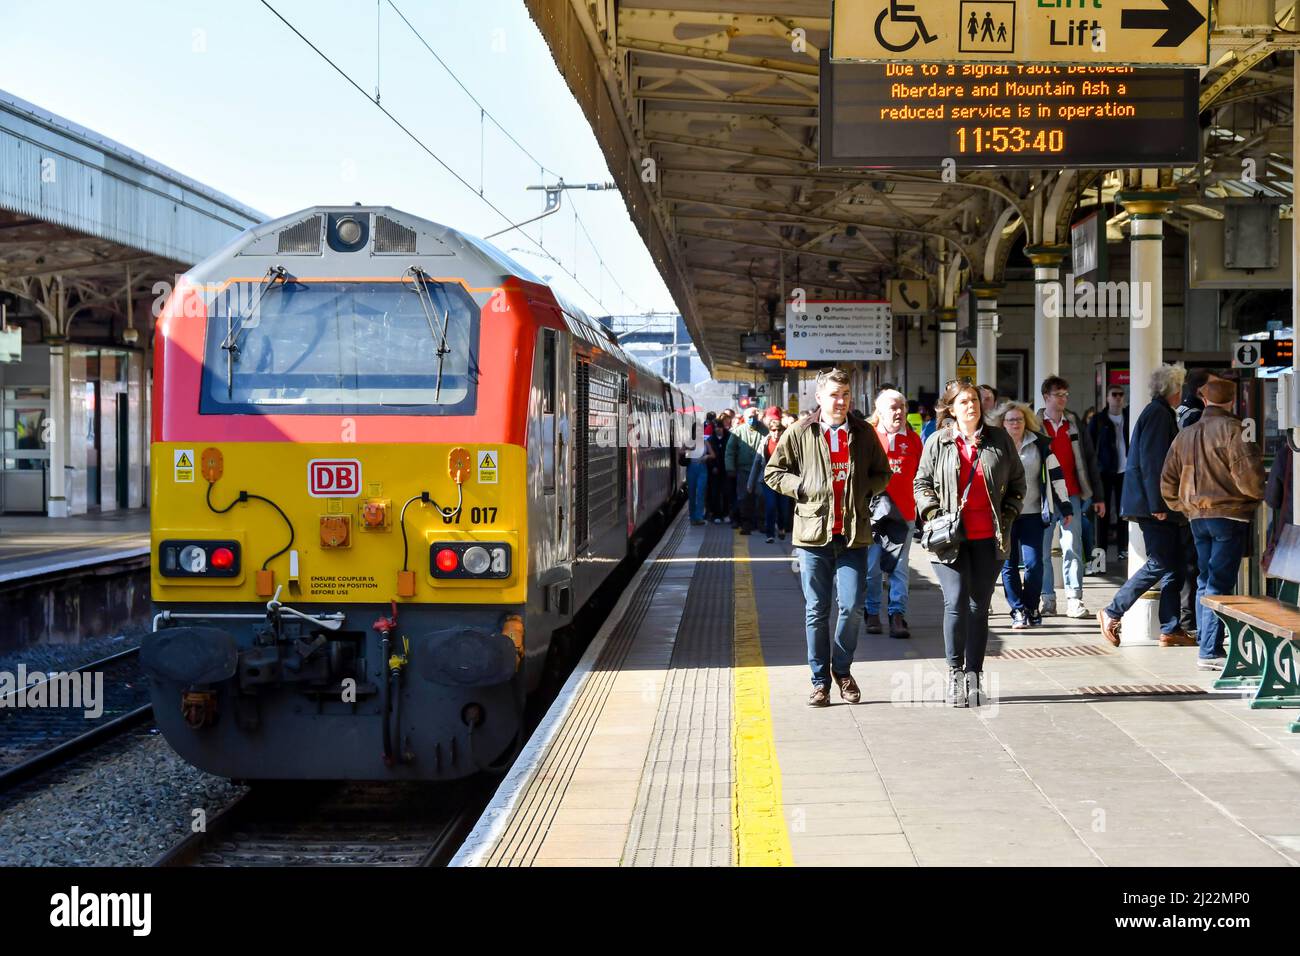 Cardiff, Wales - March 2022: People arriving at Cardiff Central railway station for a rugby match Stock Photo